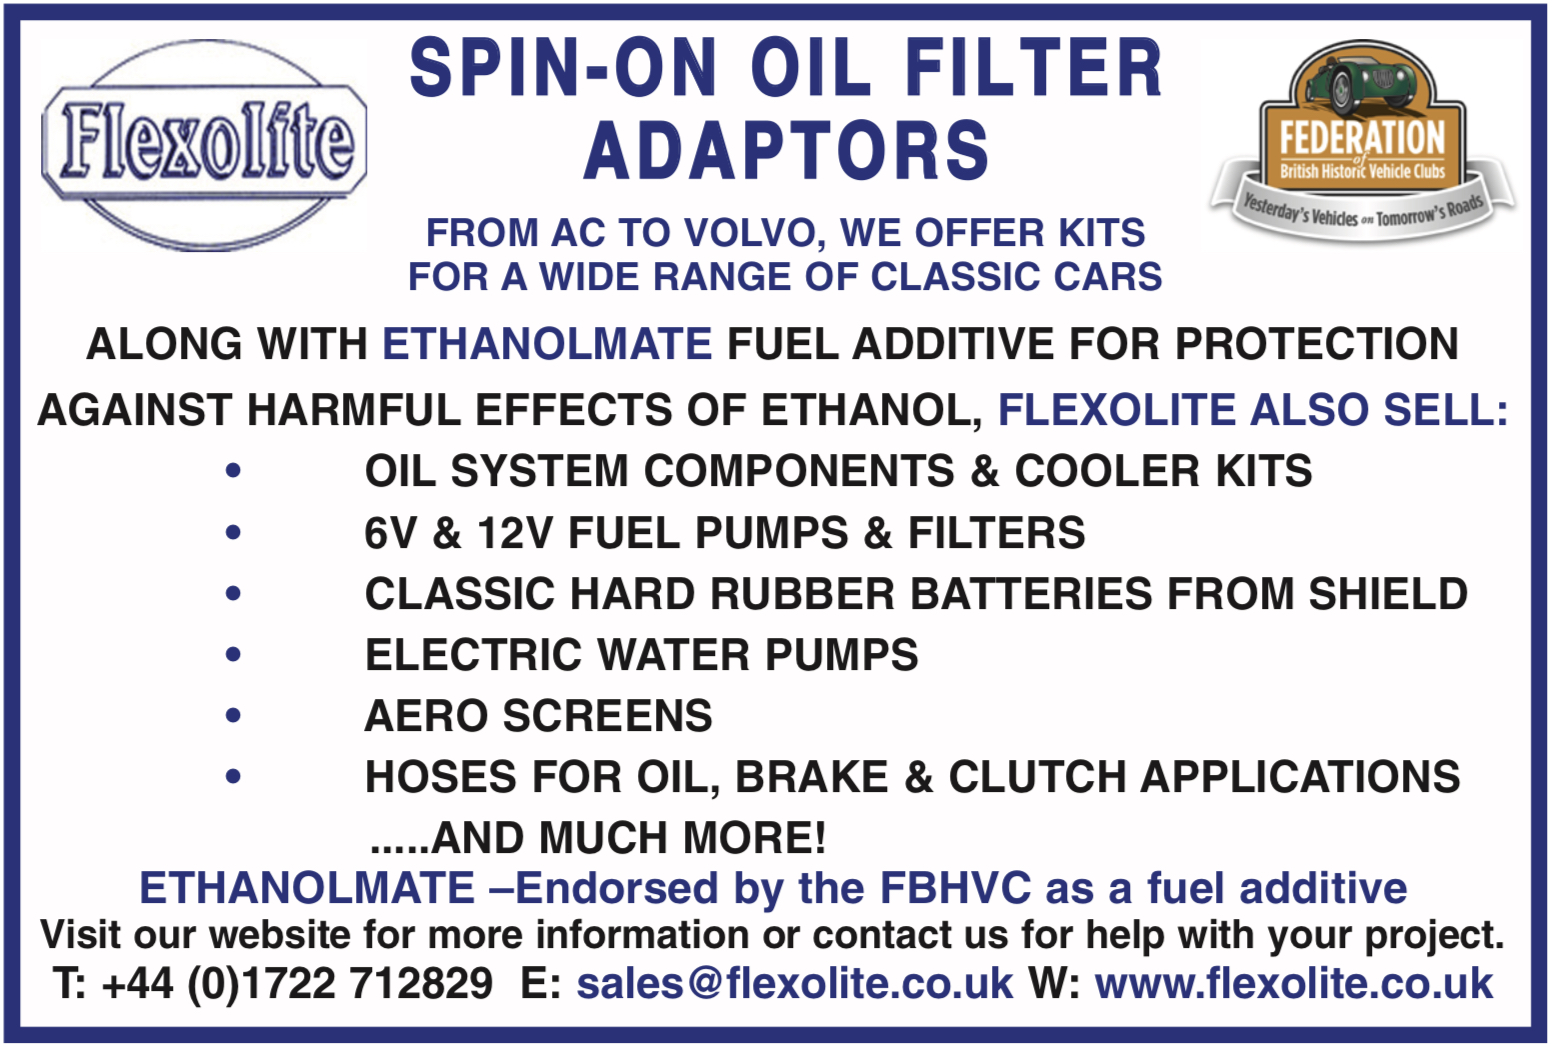 Flexolite - Spin-on oil filters, hoses, fuel systems, fluid systems for classic cars